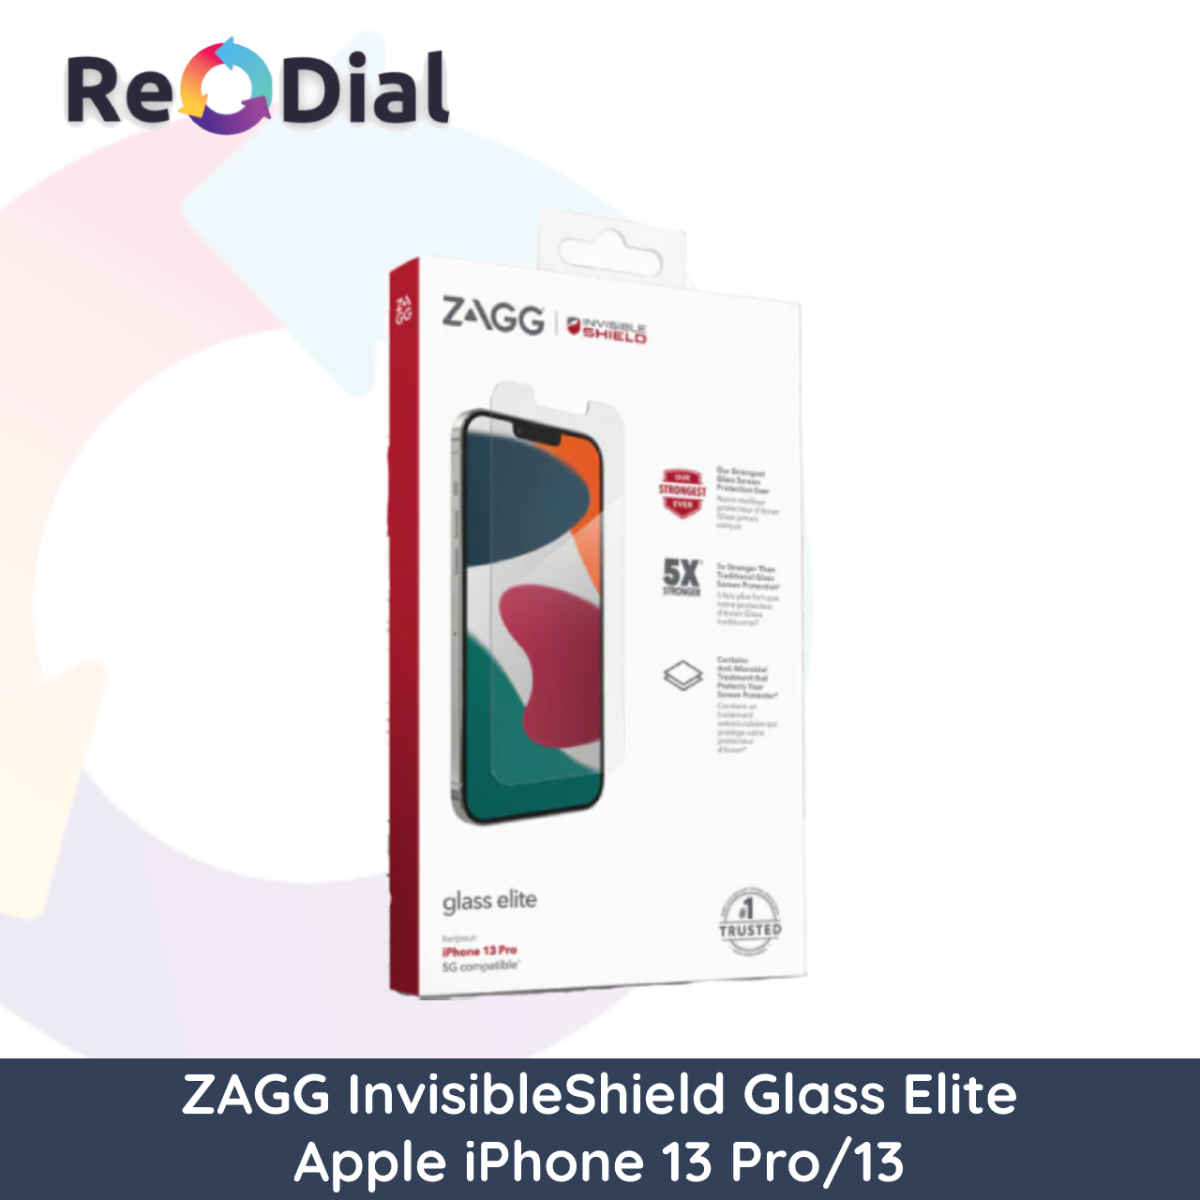 ZAGG InvisibleShield Glass Elite Screen Protector for Apple iPhone 13 Pro/13